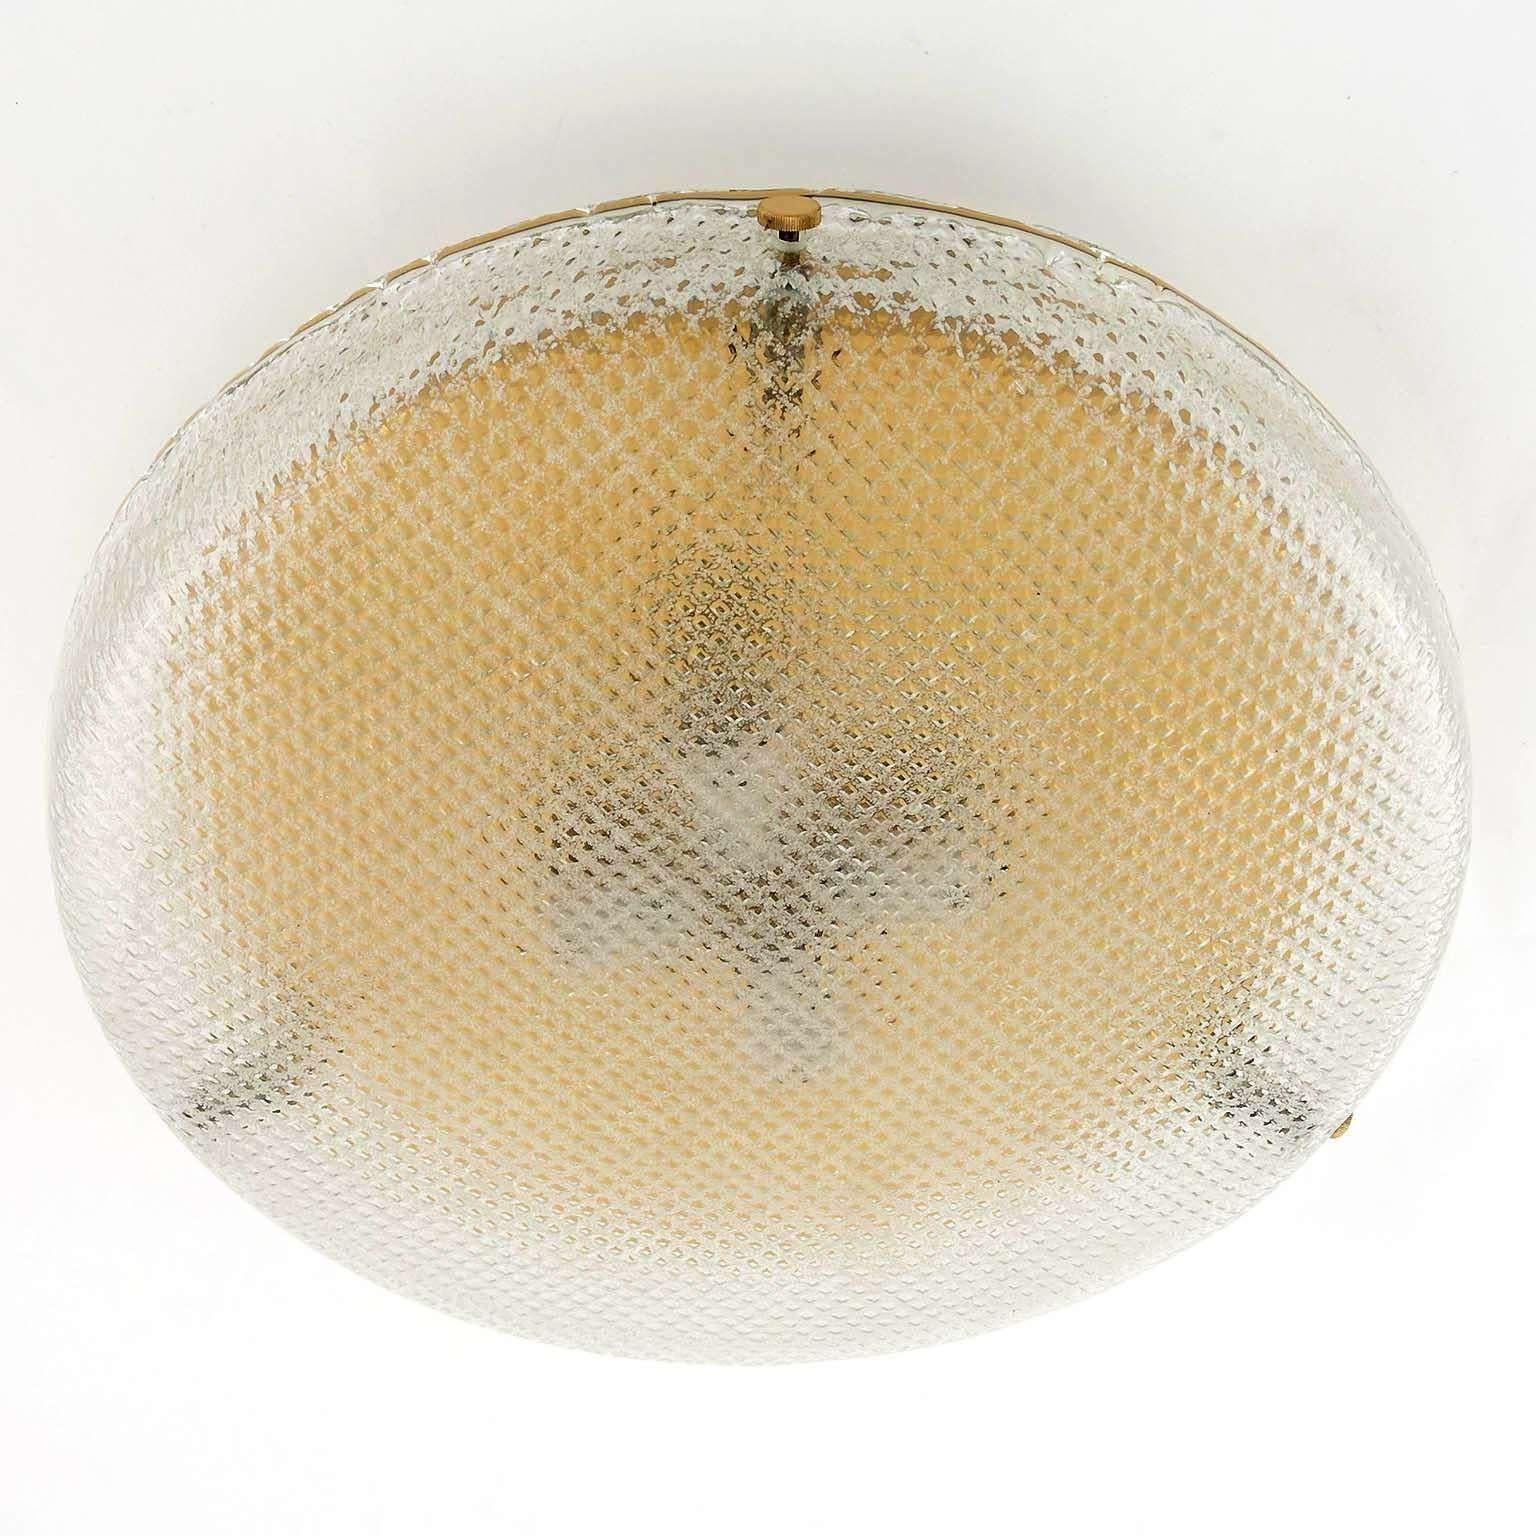 A wonderful light fixture by Hillebrand, Germany, manufactured in midcentury, circa 1970 (late 1960s or early 1970s). 
It can be used as wall or ceiling lamp. A round textured glass with a grid pattern is mounted with three brass bolts on a